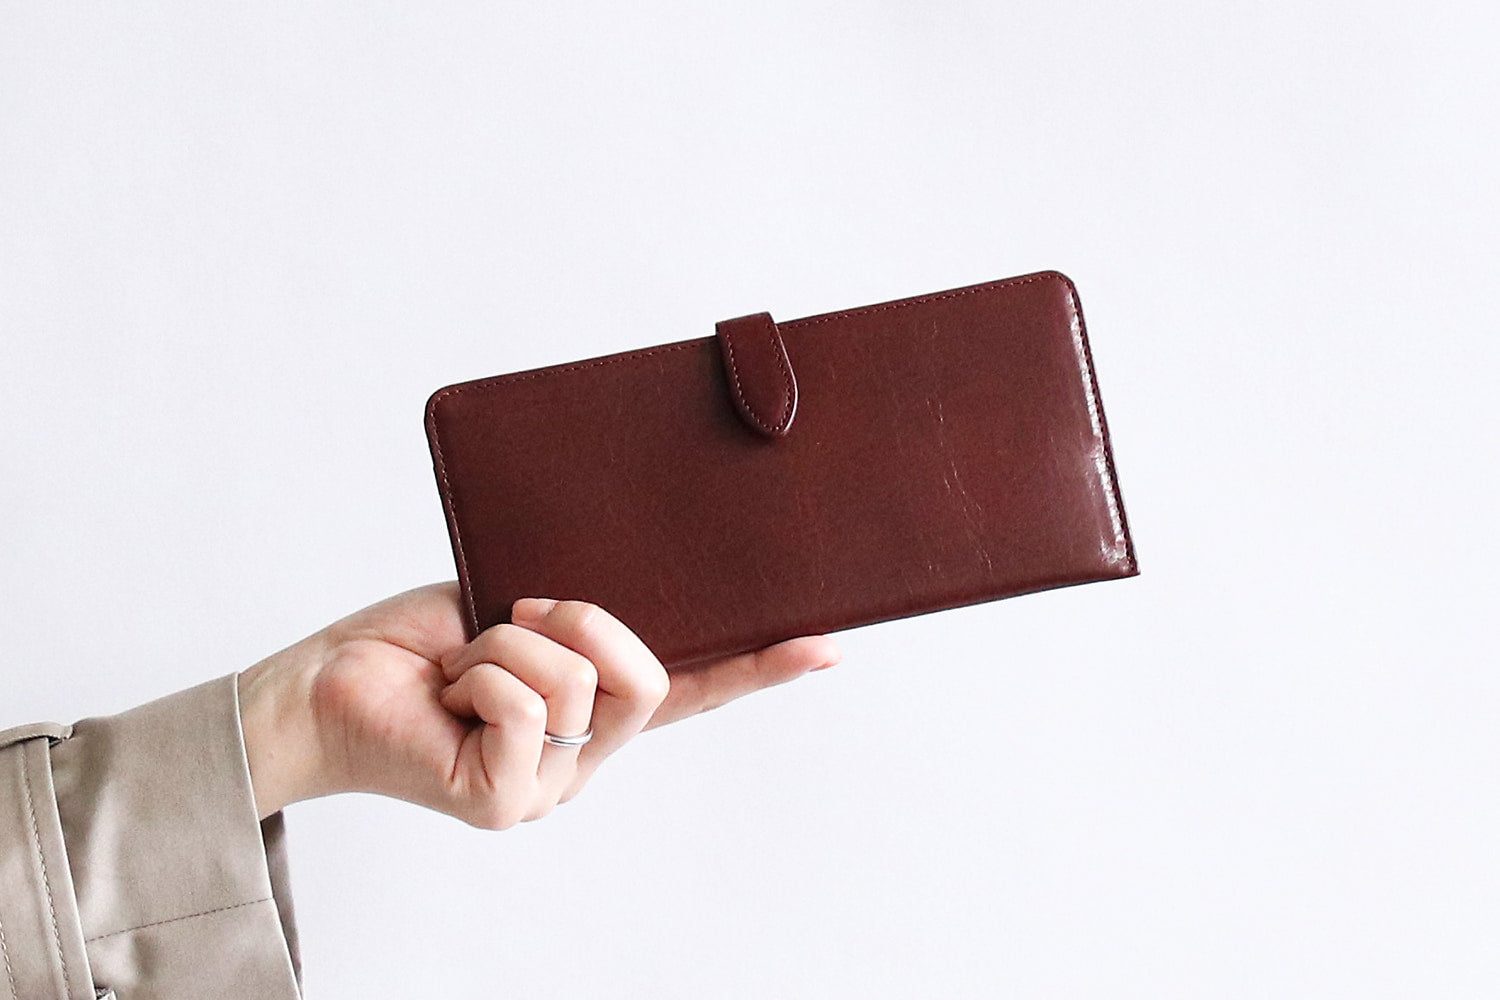 Atelier nuu / Lezza botanica vino Smart long wallet made of sustainable leather dyed with wine residue 